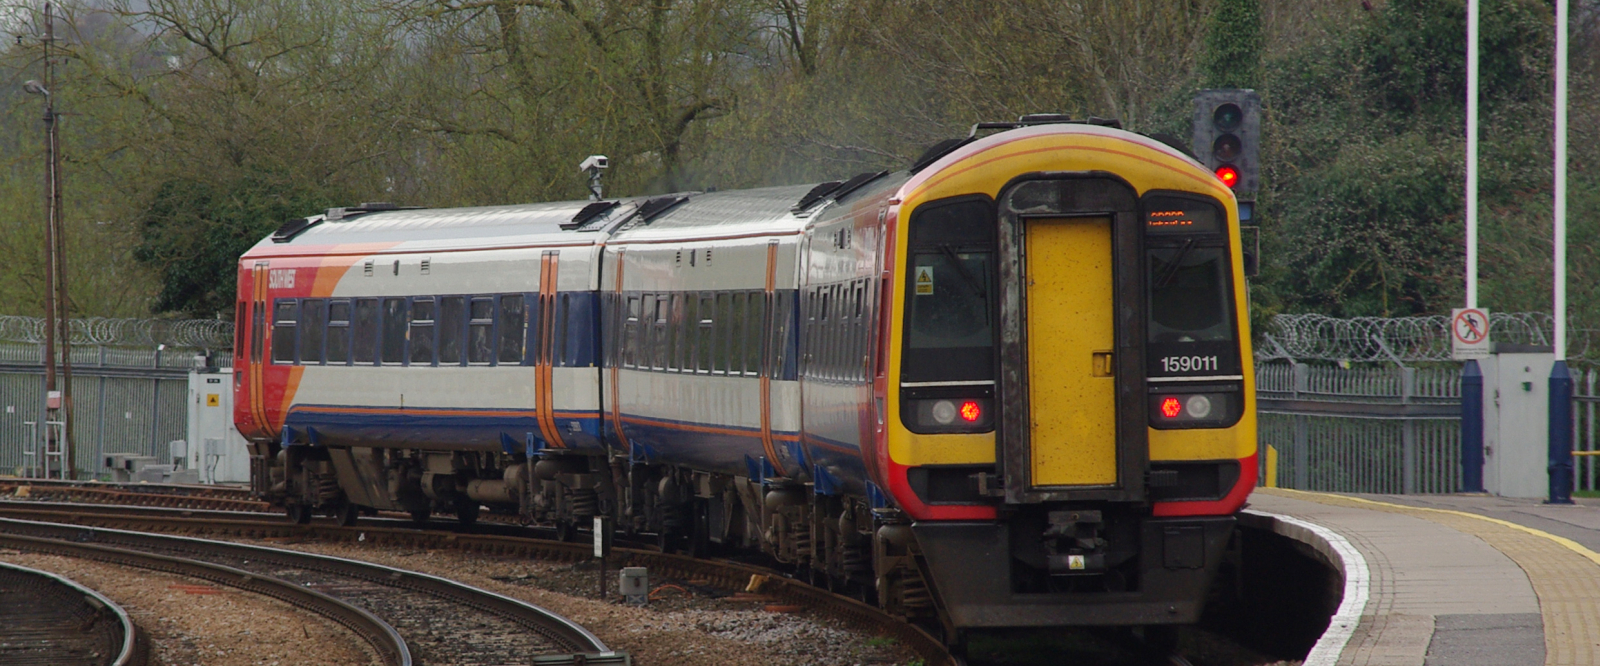 South West Trains 159011 in April 2010 at Salisbury